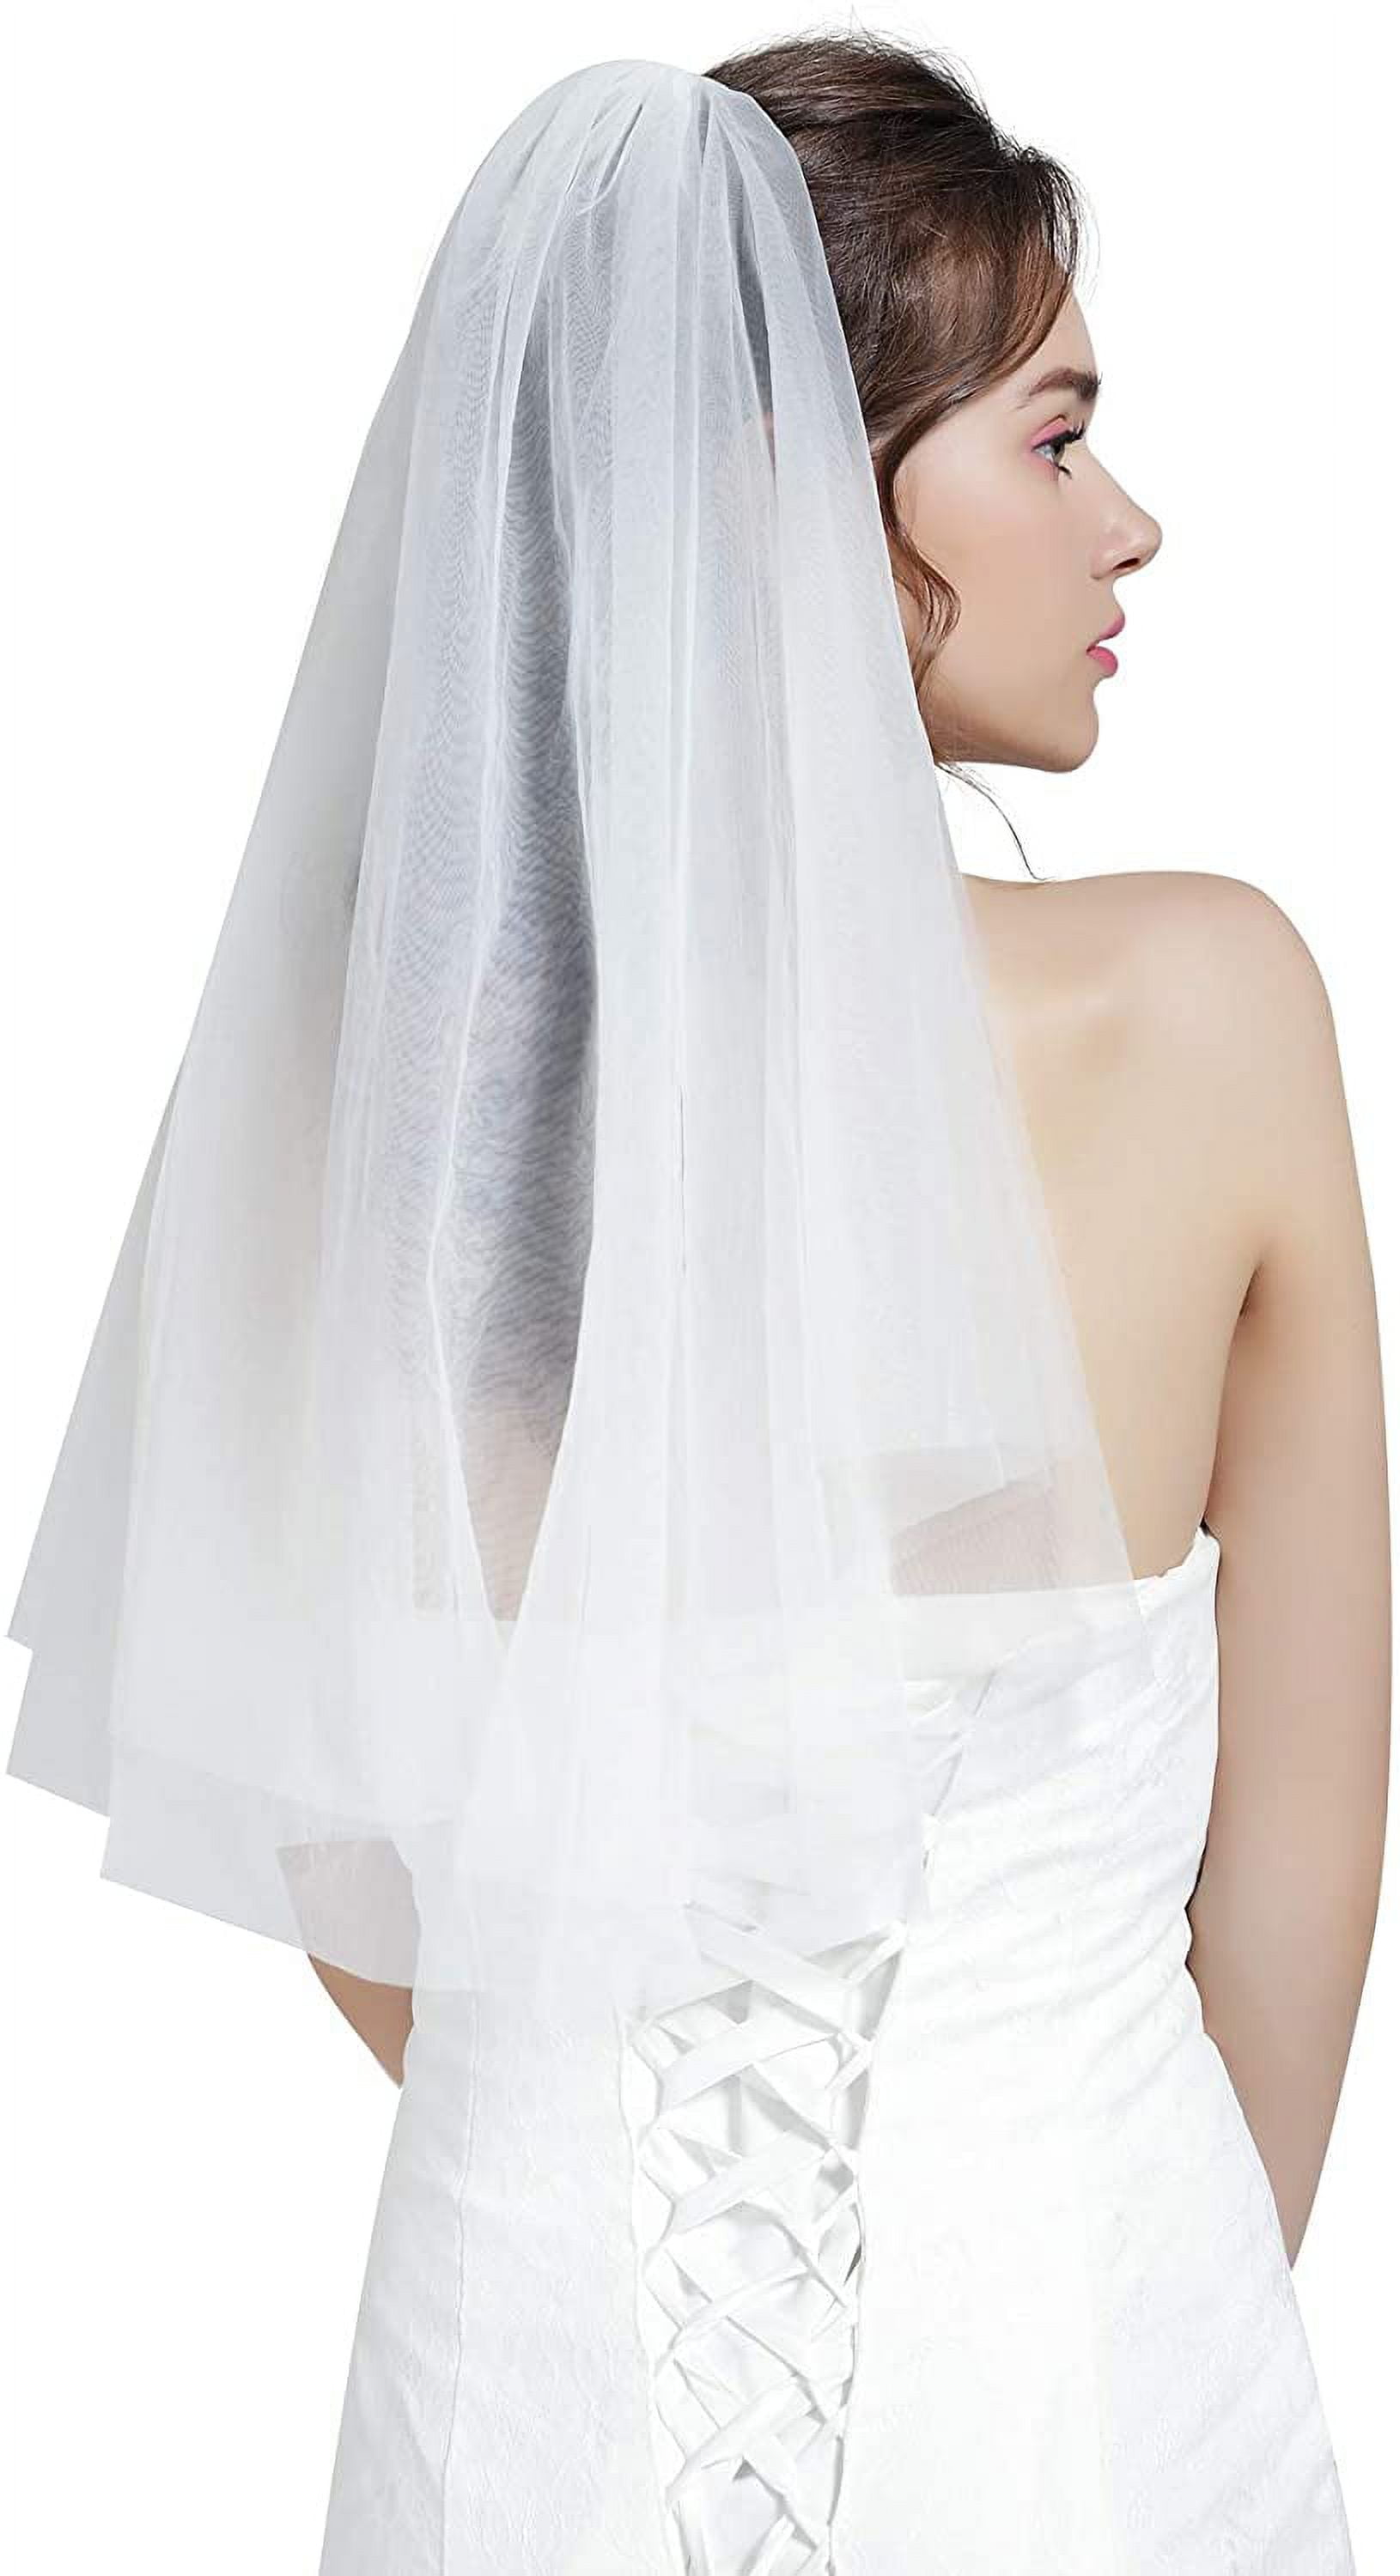 Eaytmo Women's Champagne Veils 2-Tier Bride Wedding Veil with Comb Short  Hip Length Bridal Veil Soft Tulle Hair Accessories for Brides (Champagne)